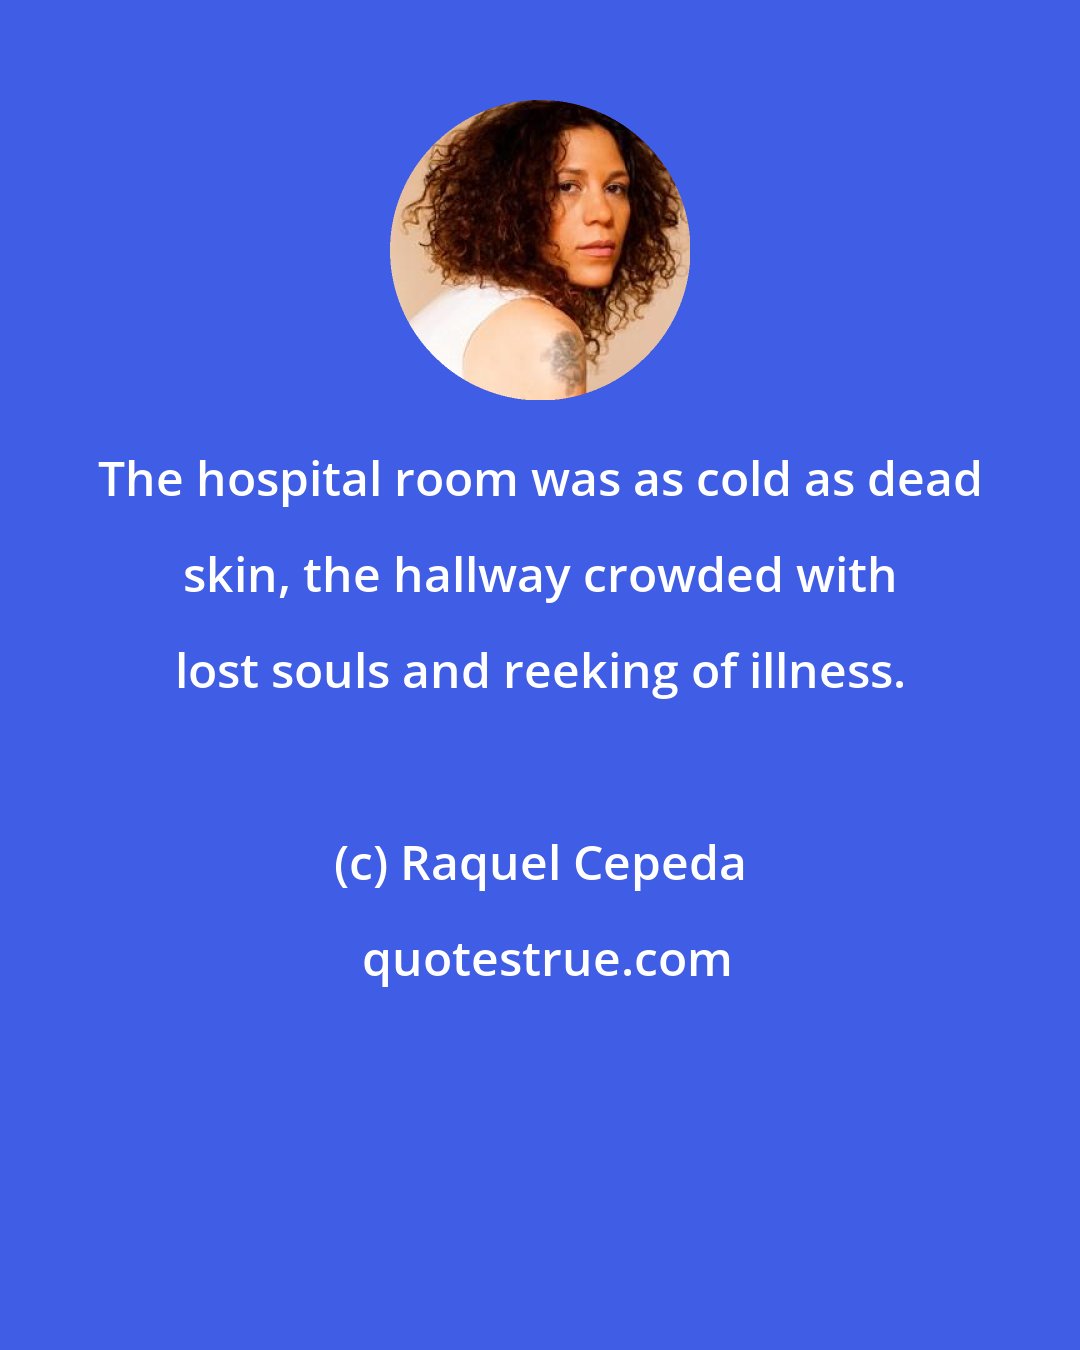 Raquel Cepeda: The hospital room was as cold as dead skin, the hallway crowded with lost souls and reeking of illness.